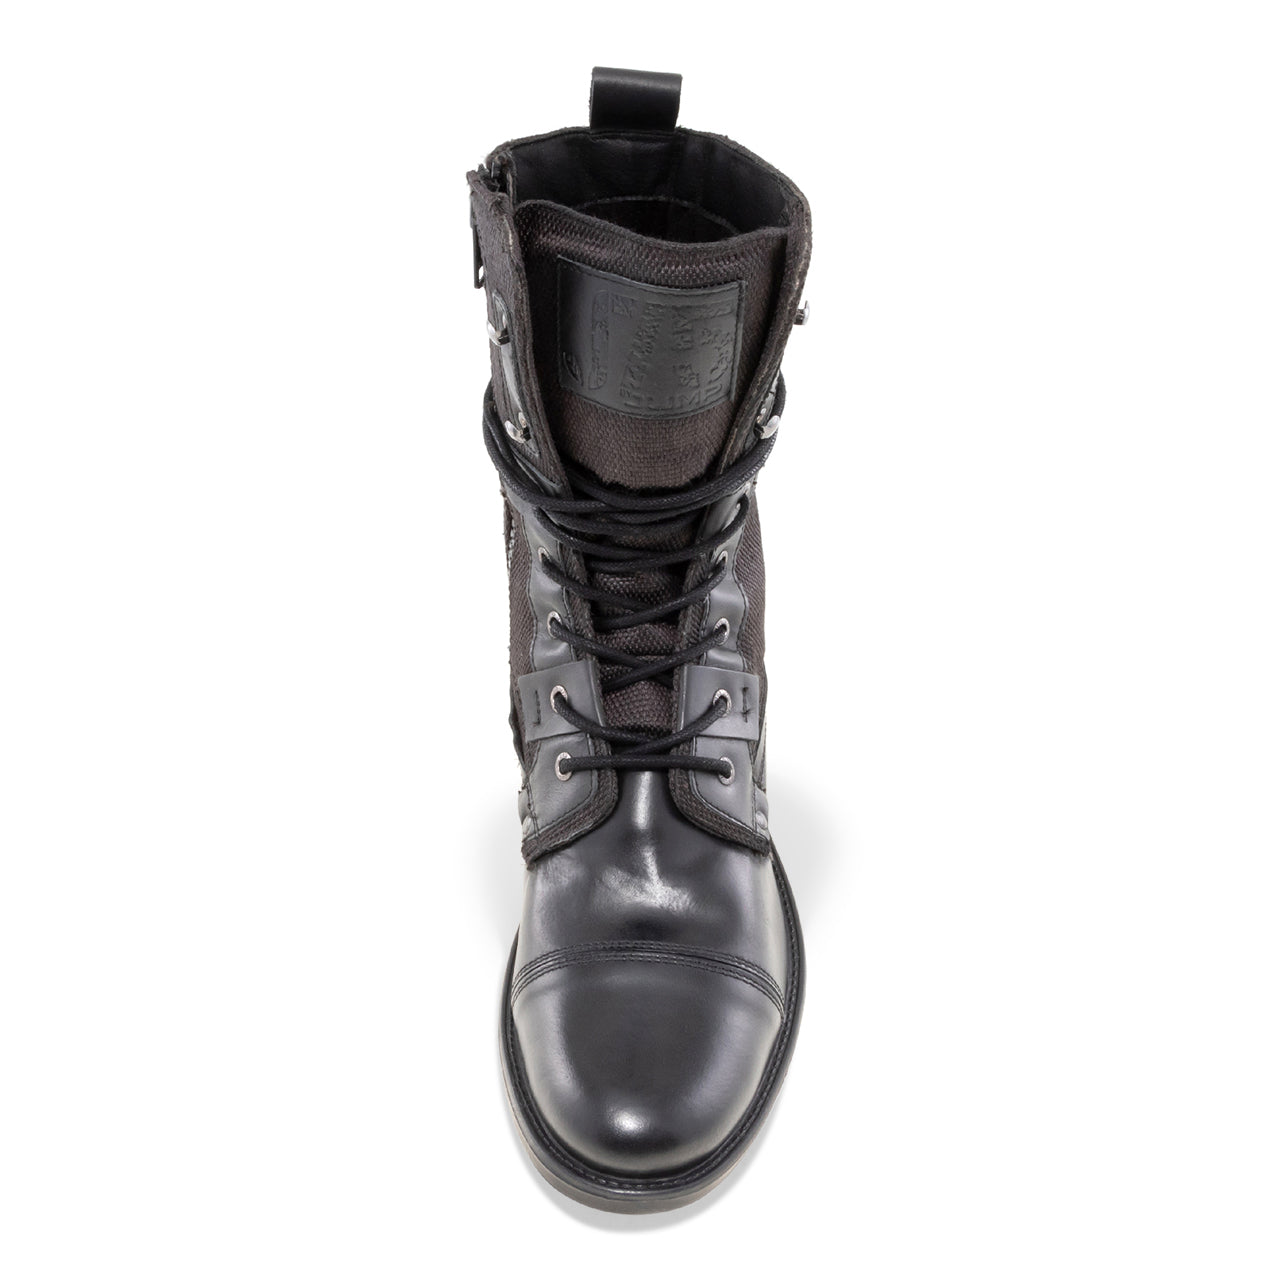 Deploy-2 - Black Mid-calf Military Boots for Men 5